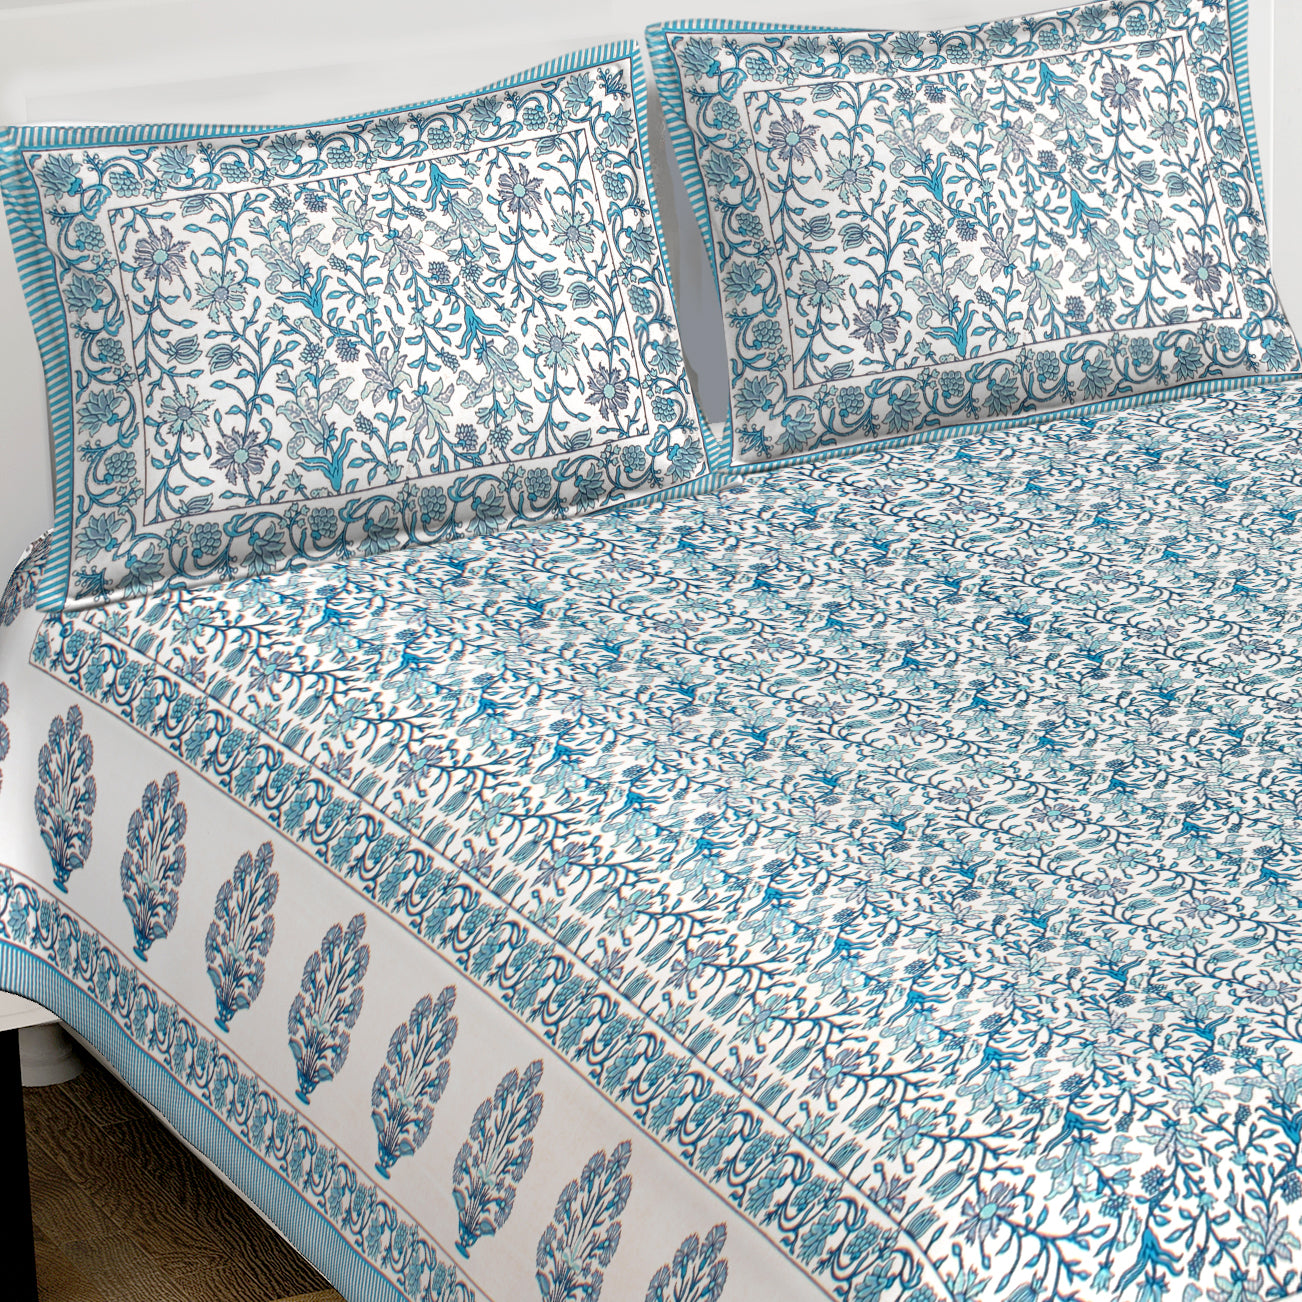 Floret Cotton Printed Double Bed Sheet With 2 Pillow Covers